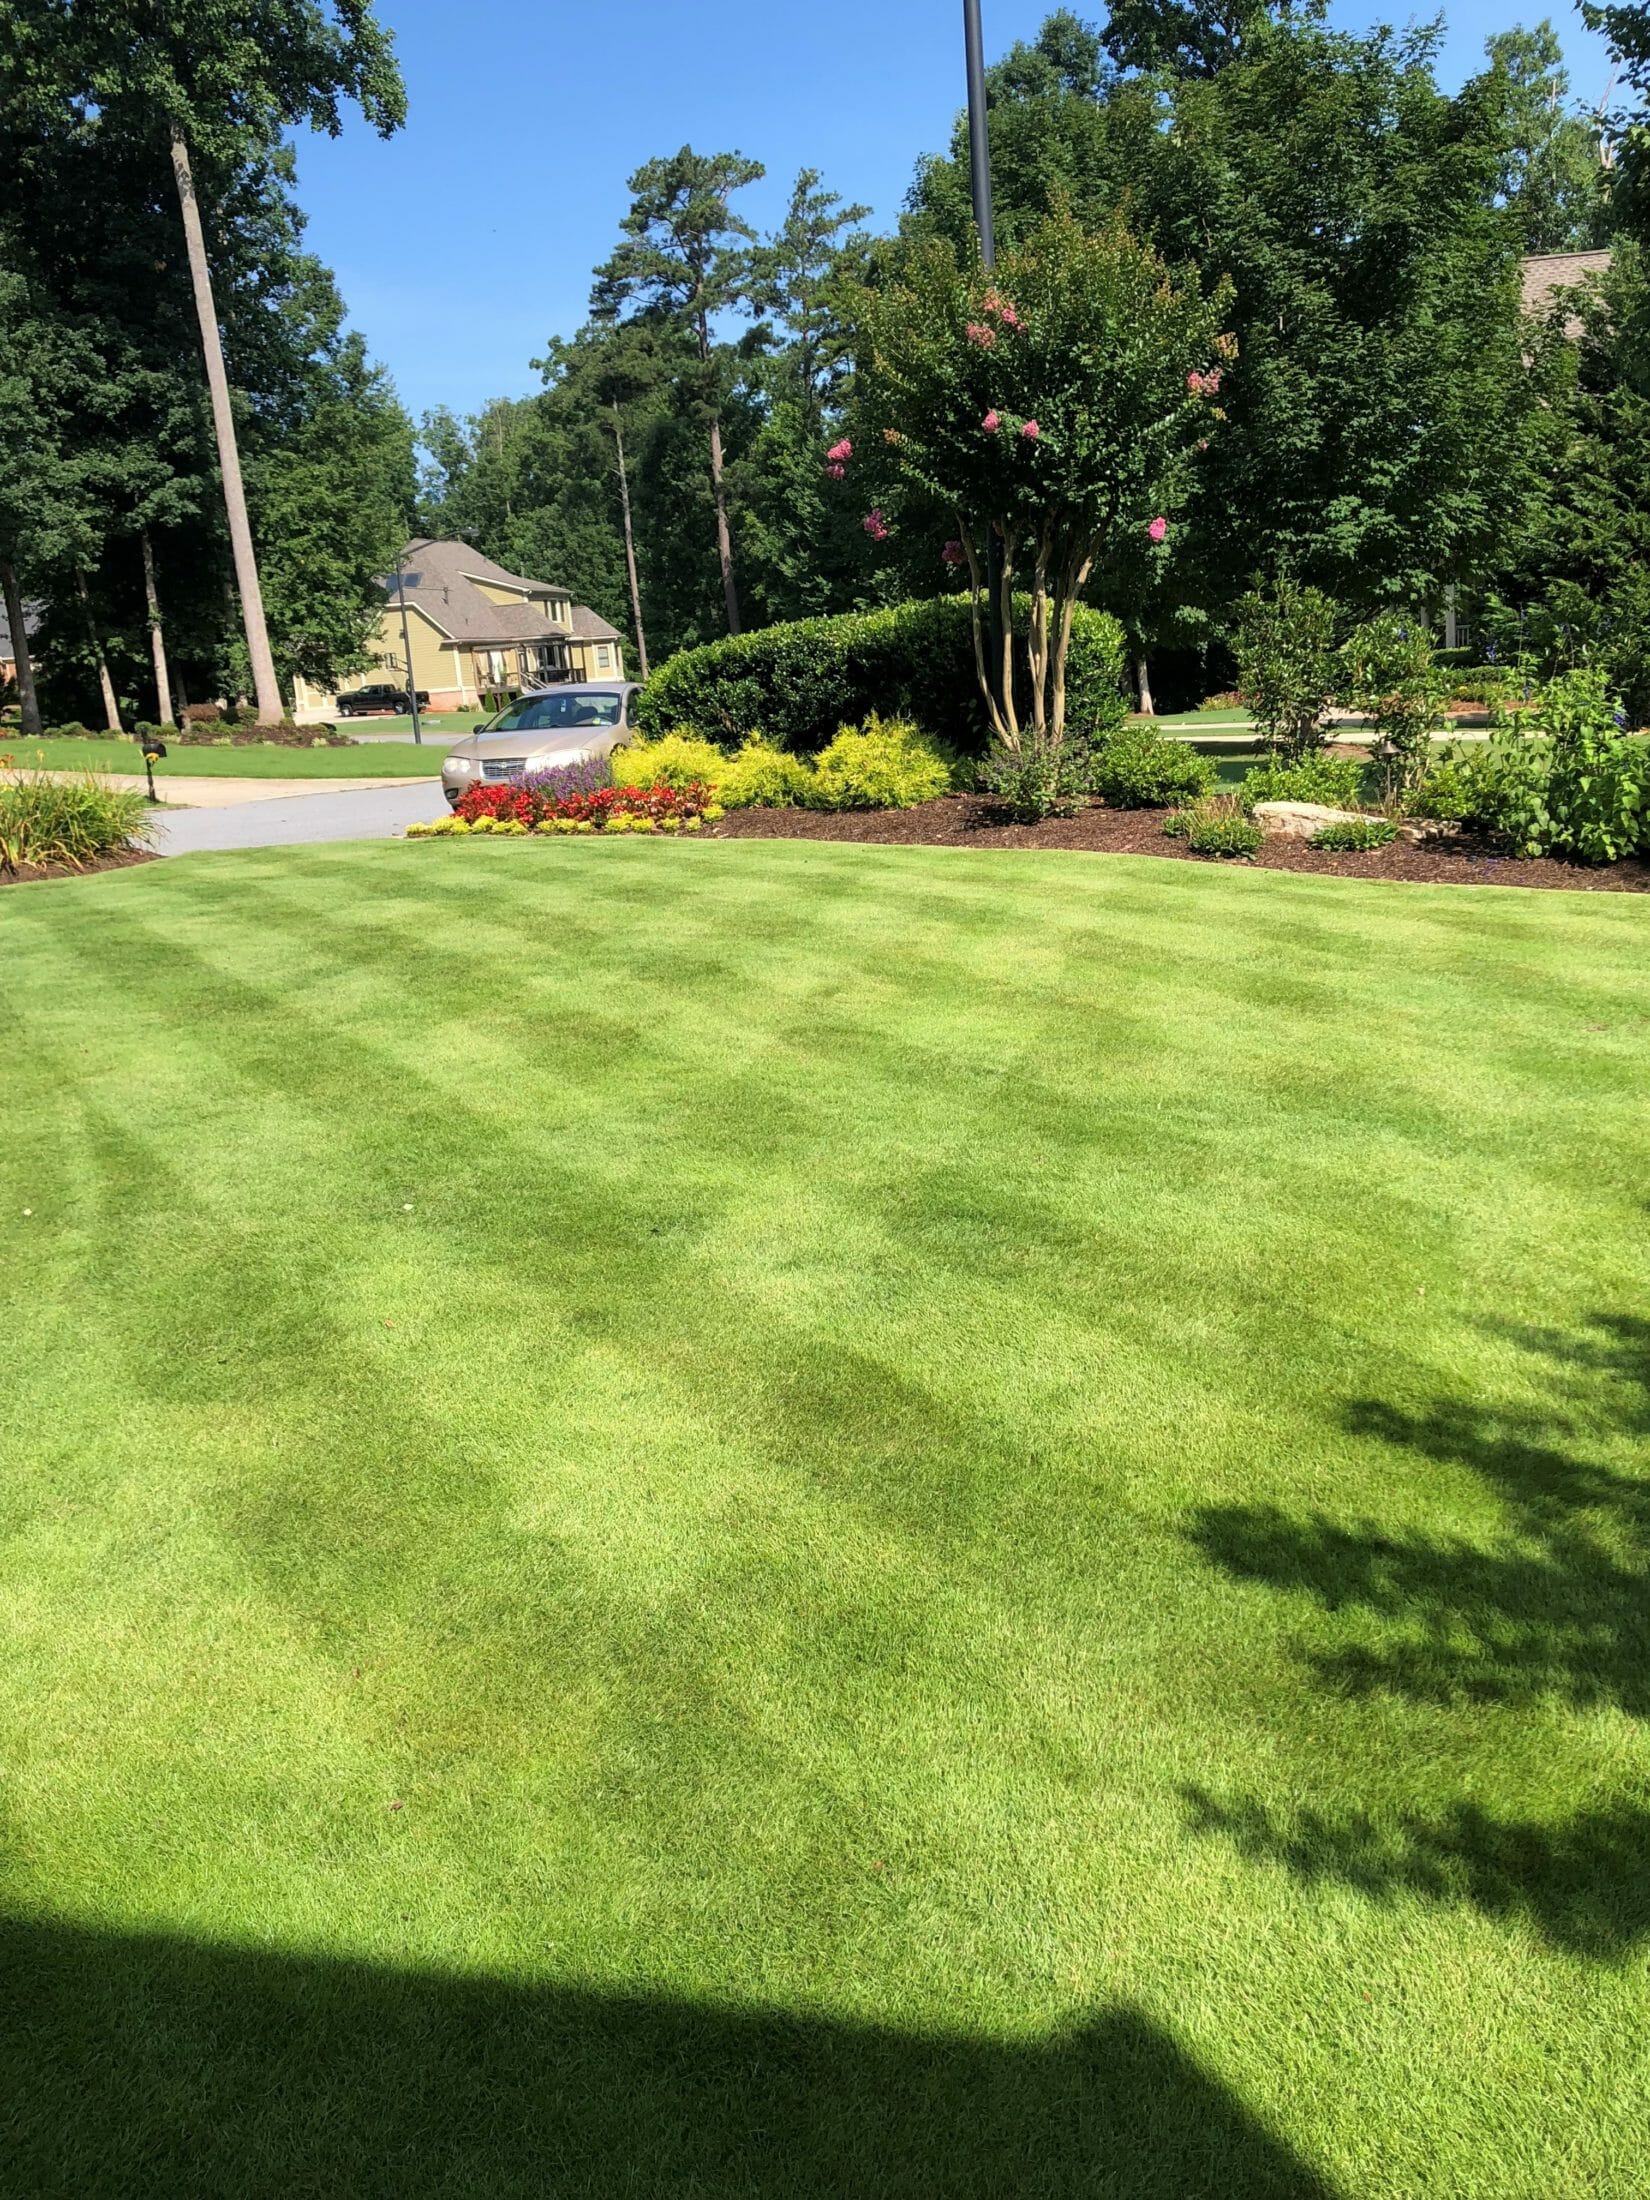 Why Soil3 is great for New Lawn Prep